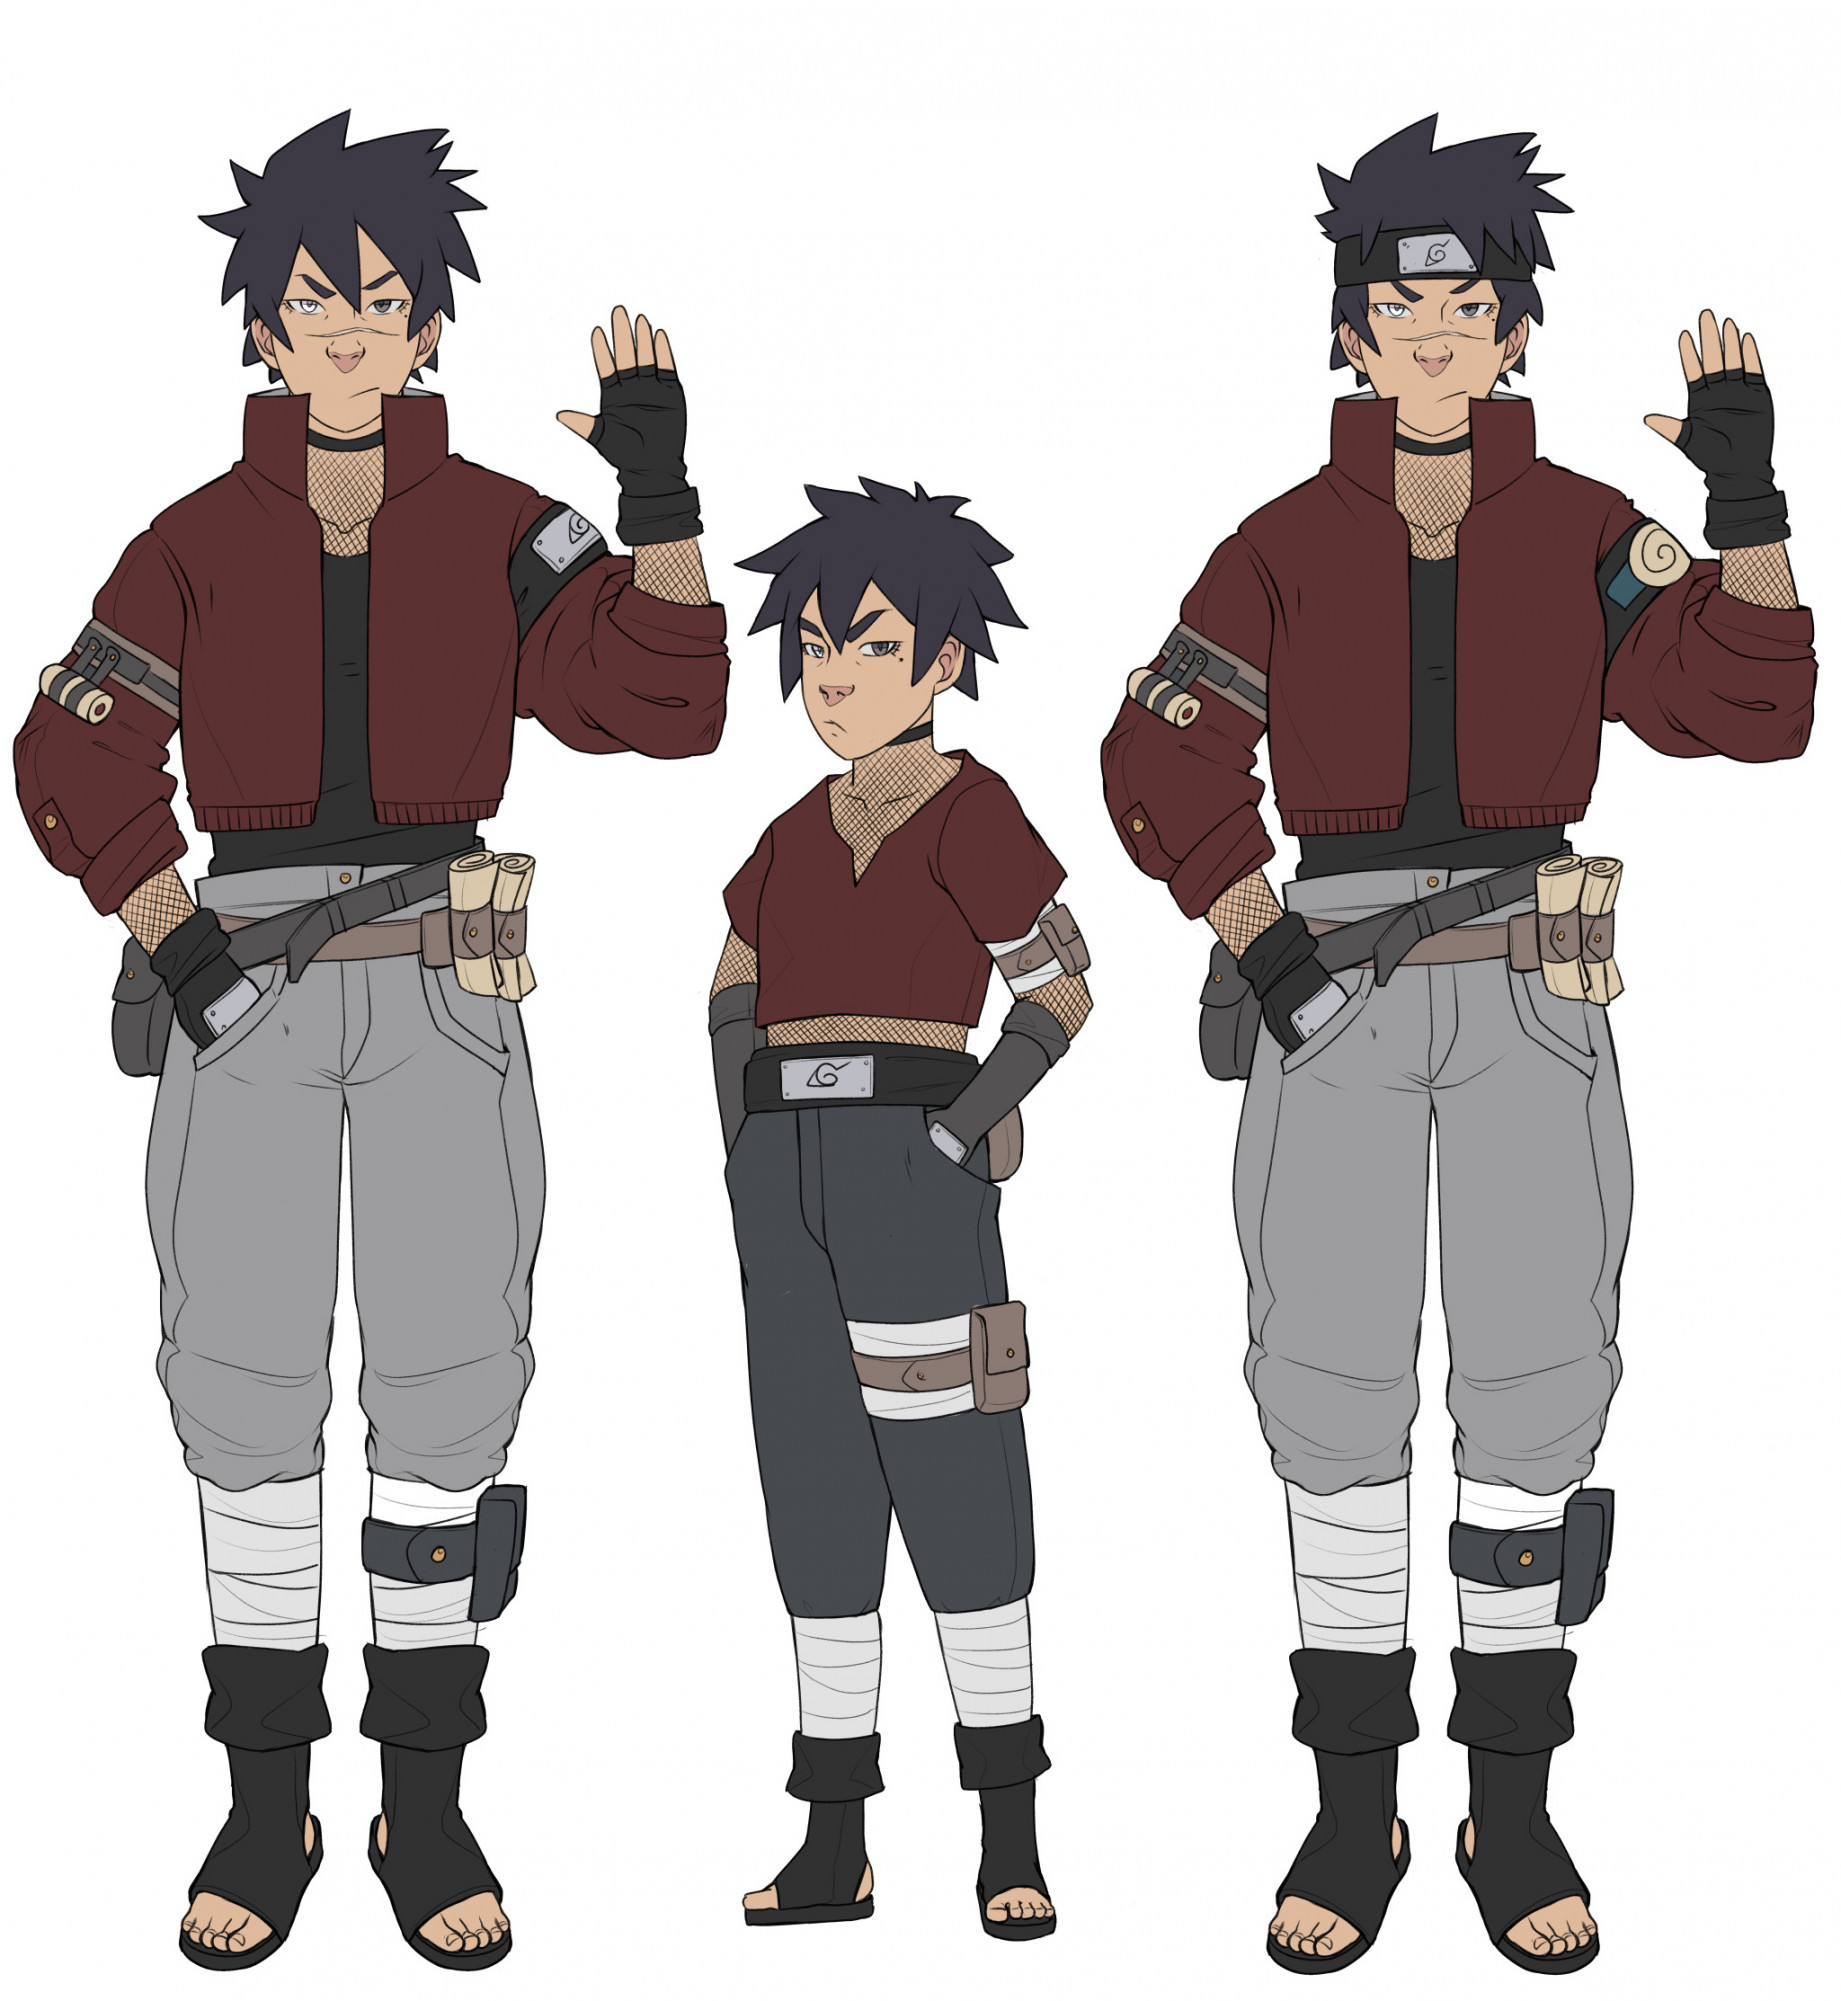 Is there a site where you can find character sheets like this one  ranime